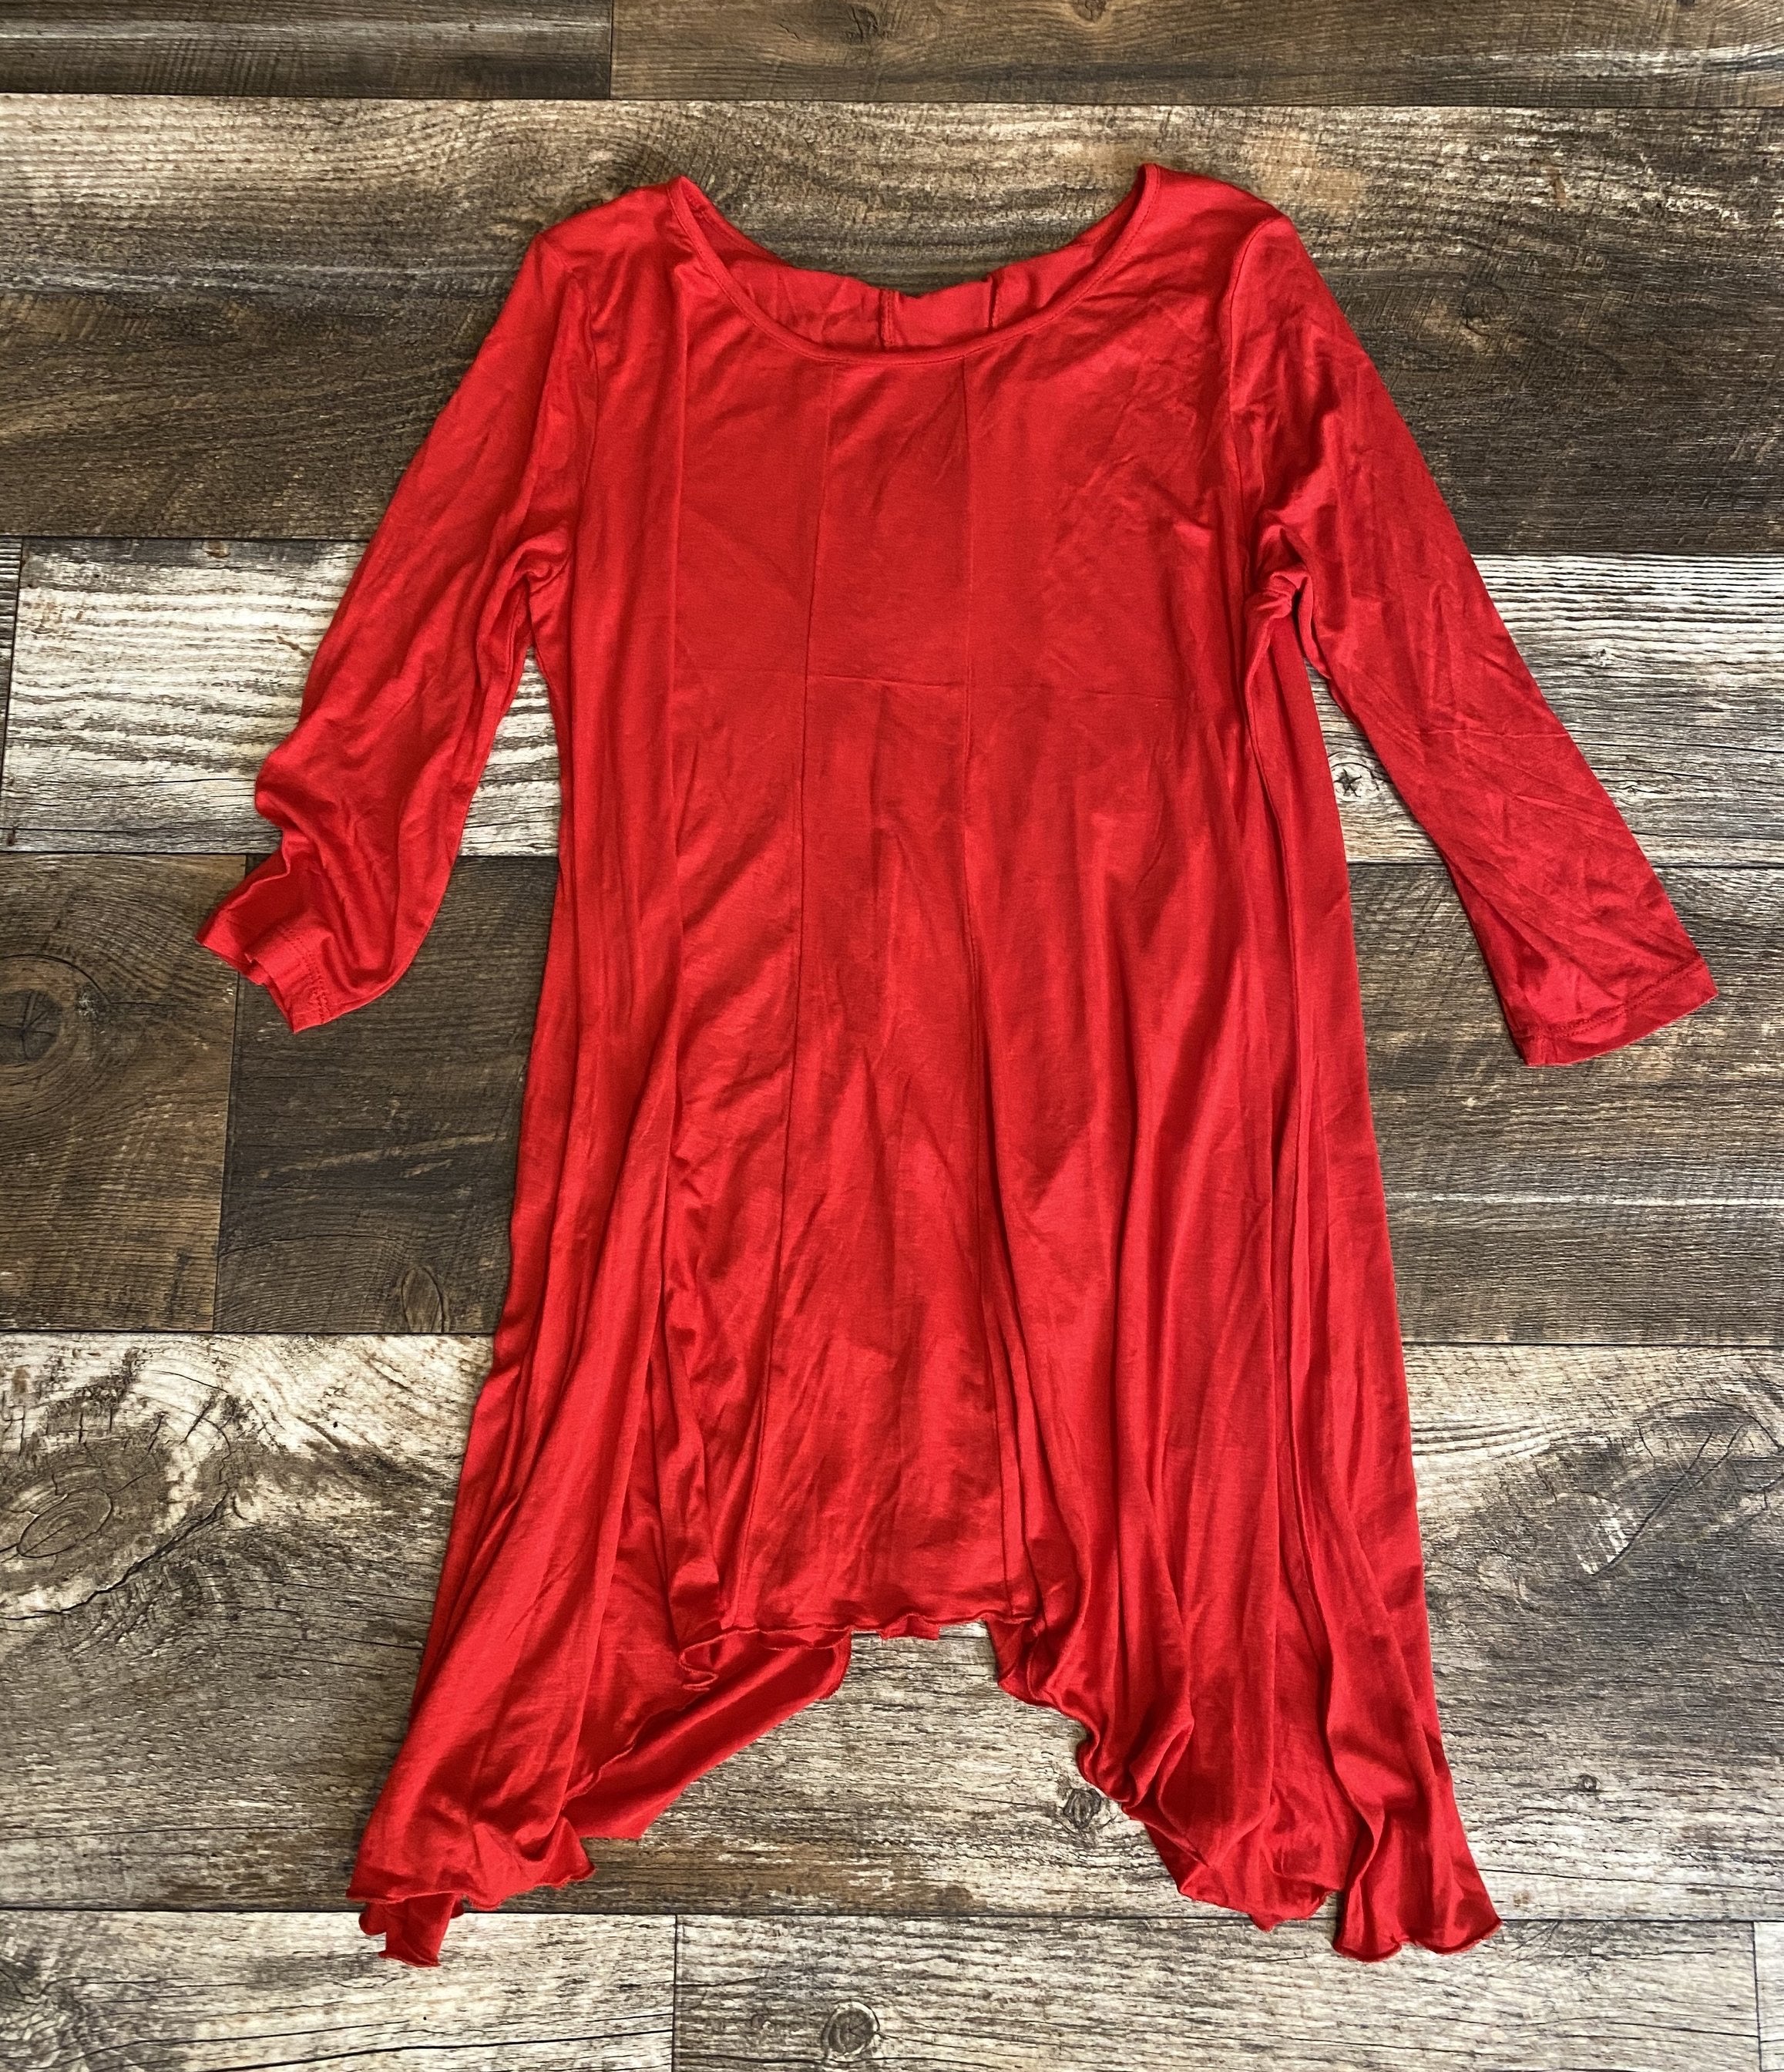 Top - Shark Bite Tunic (Red or Gray)